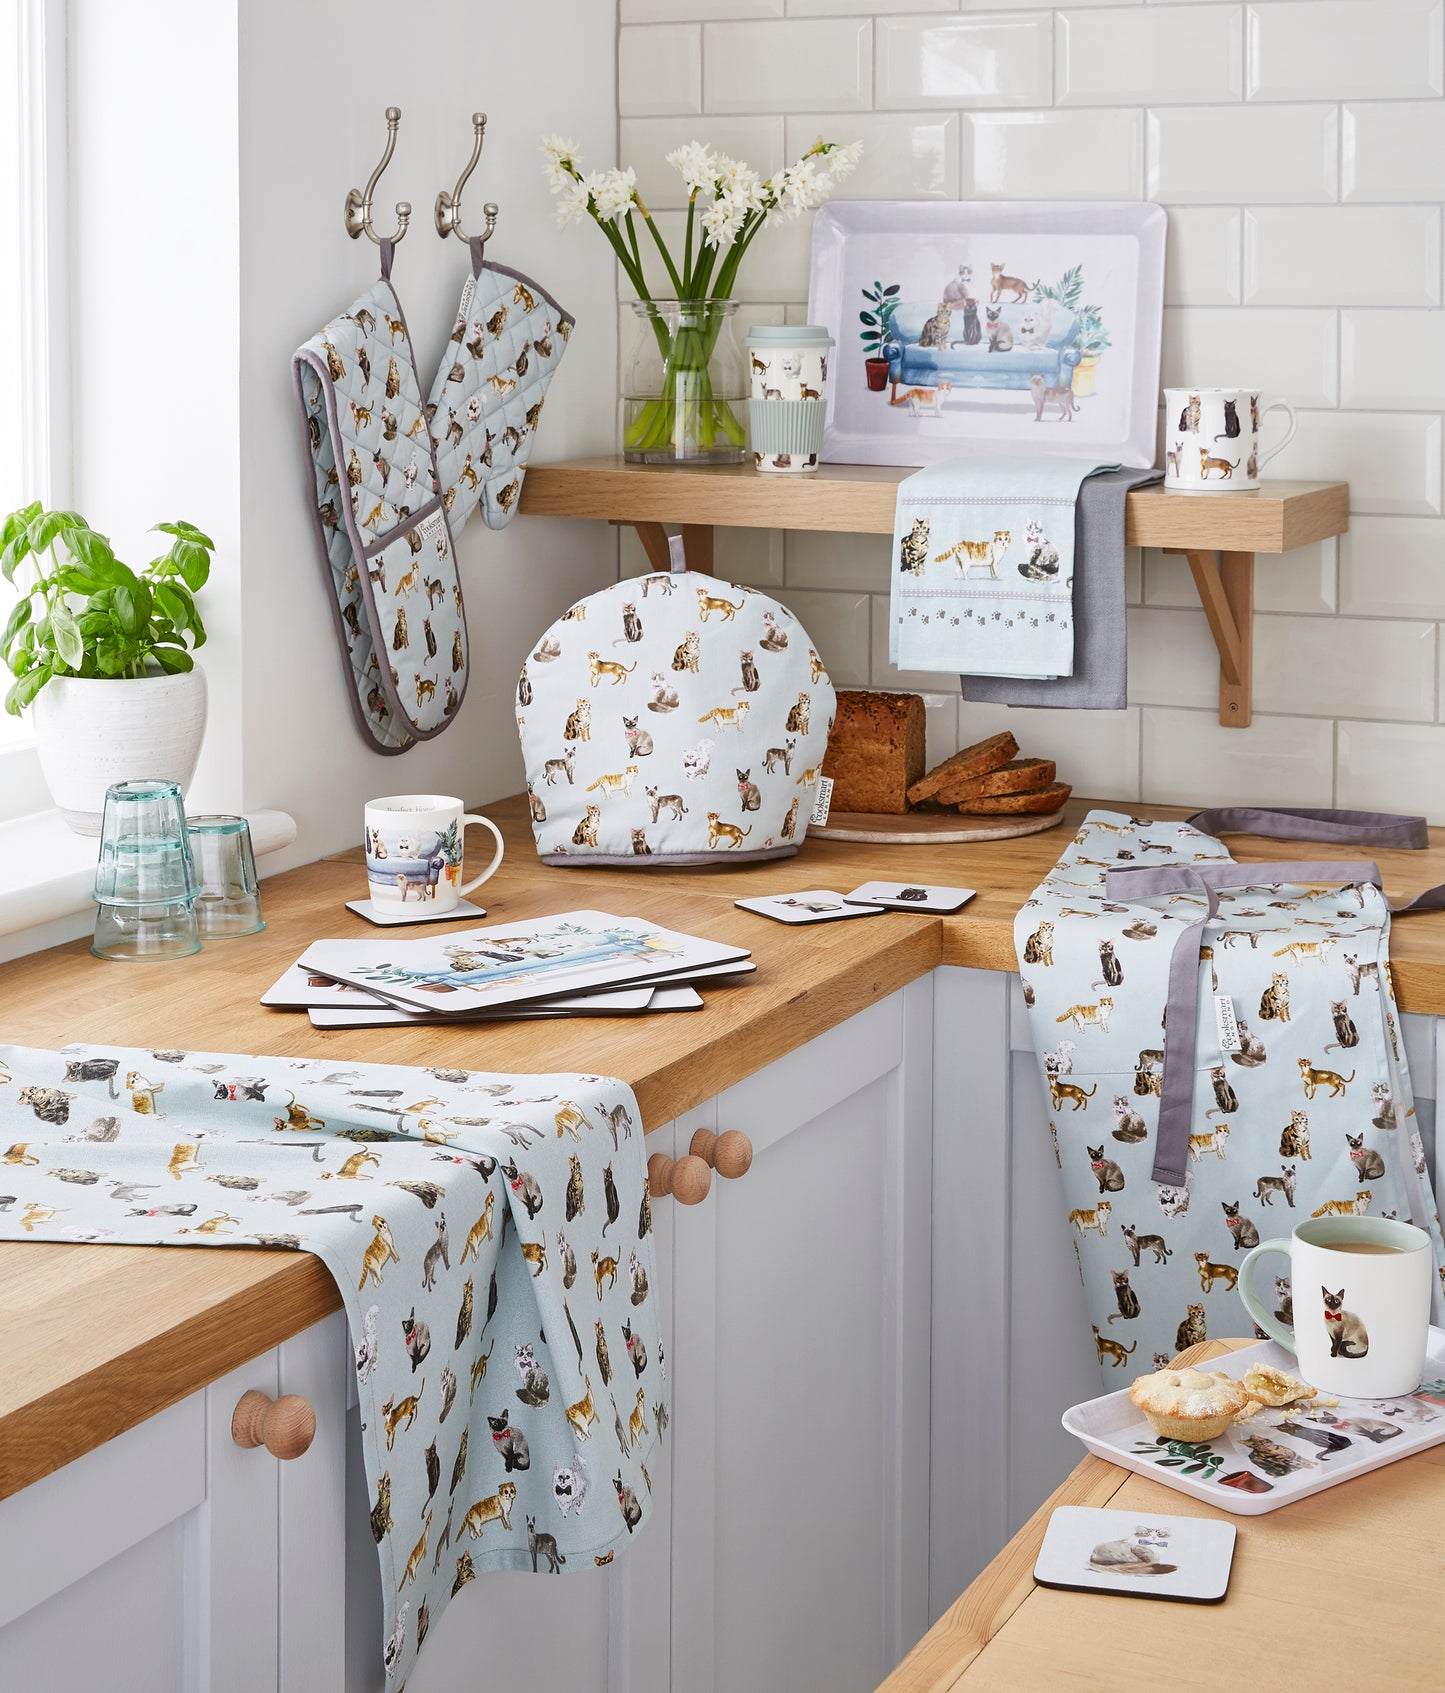 TableMats from the coordinating range of kitchenware and textiles from cooksmart.